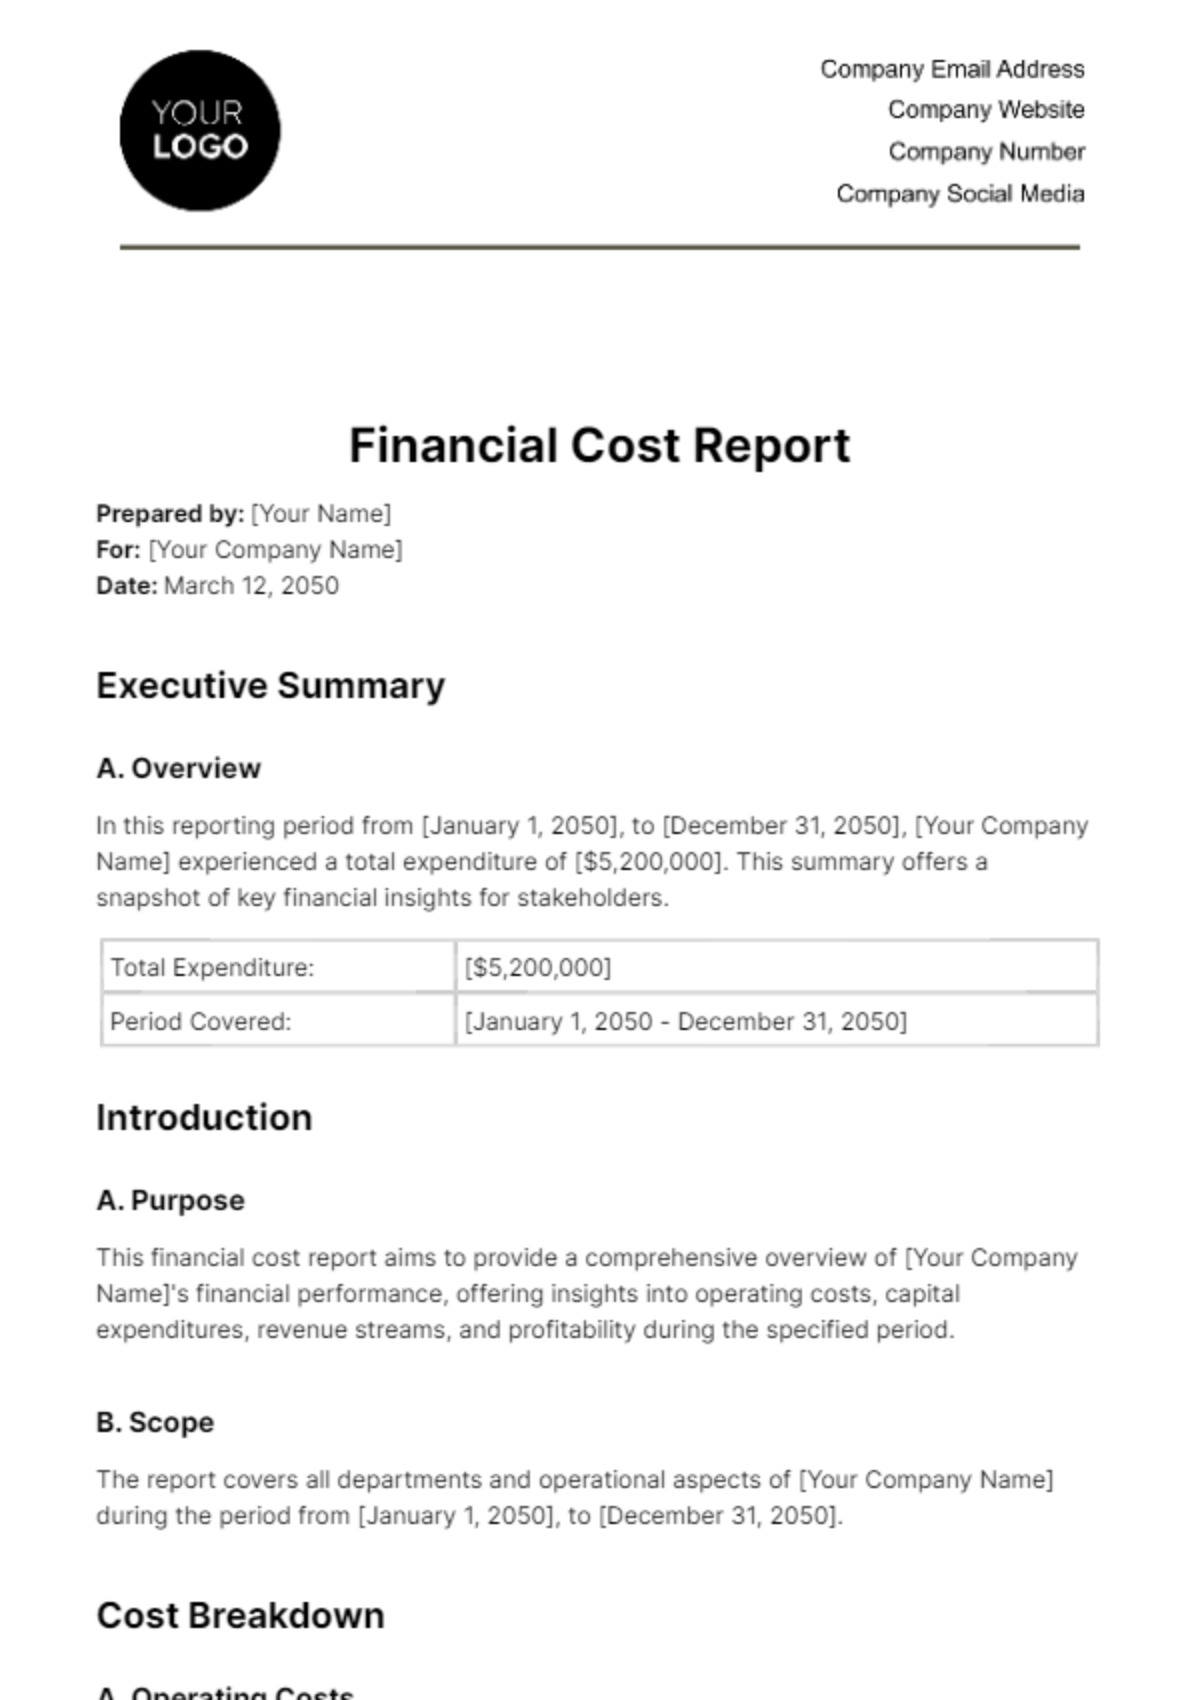 Financial Cost Report Template